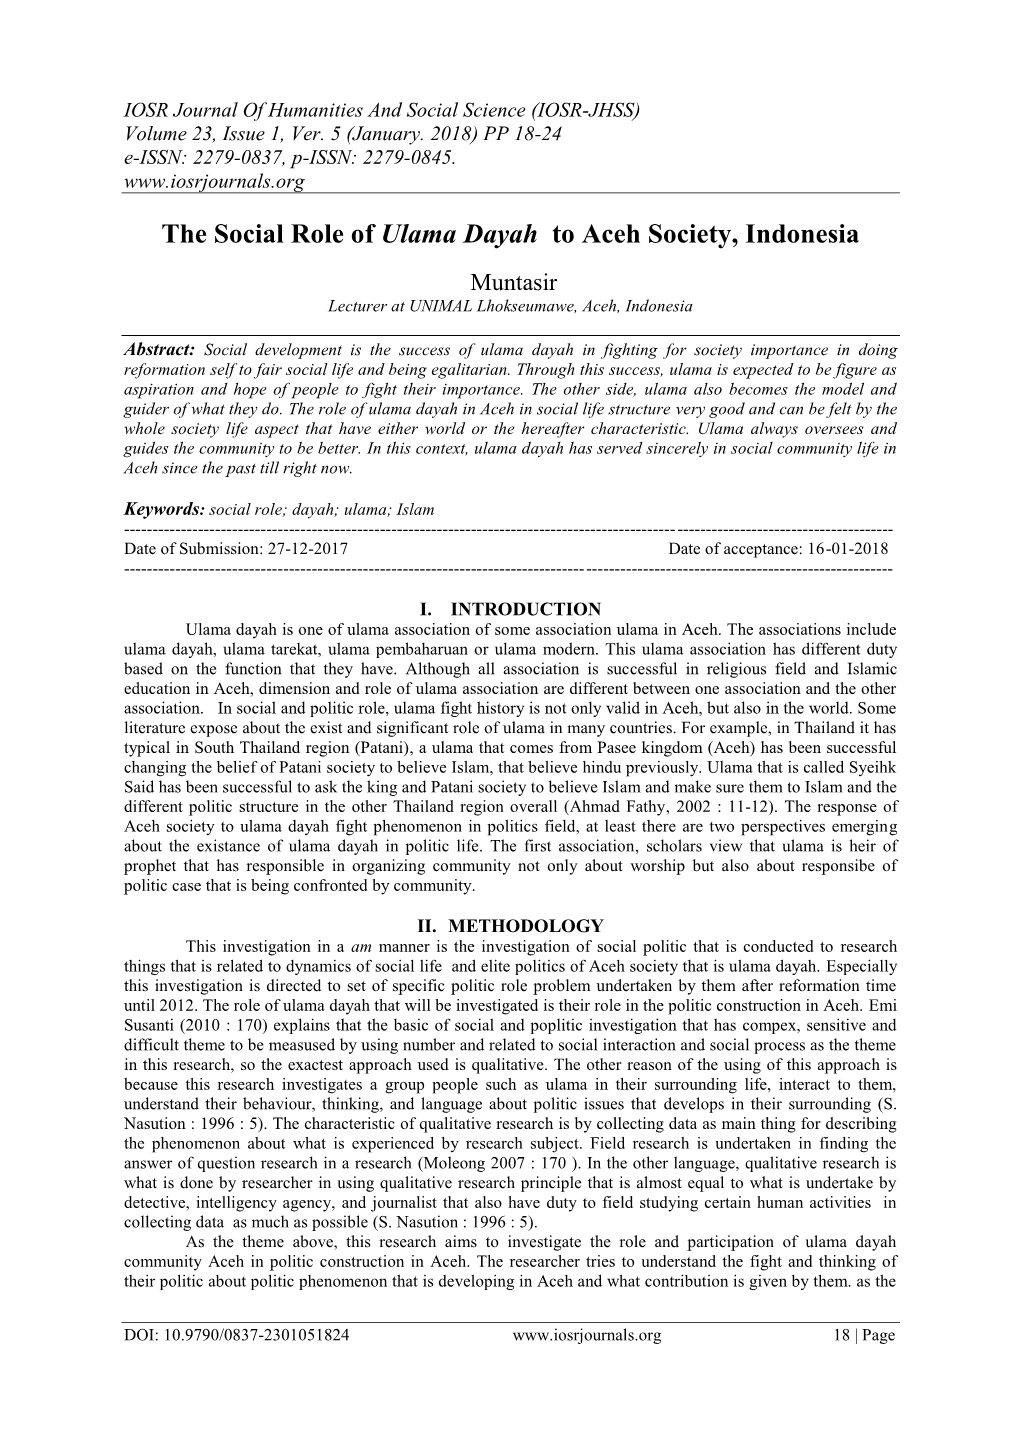 The Social Role of Ulama Dayah to Aceh Society, Indonesia